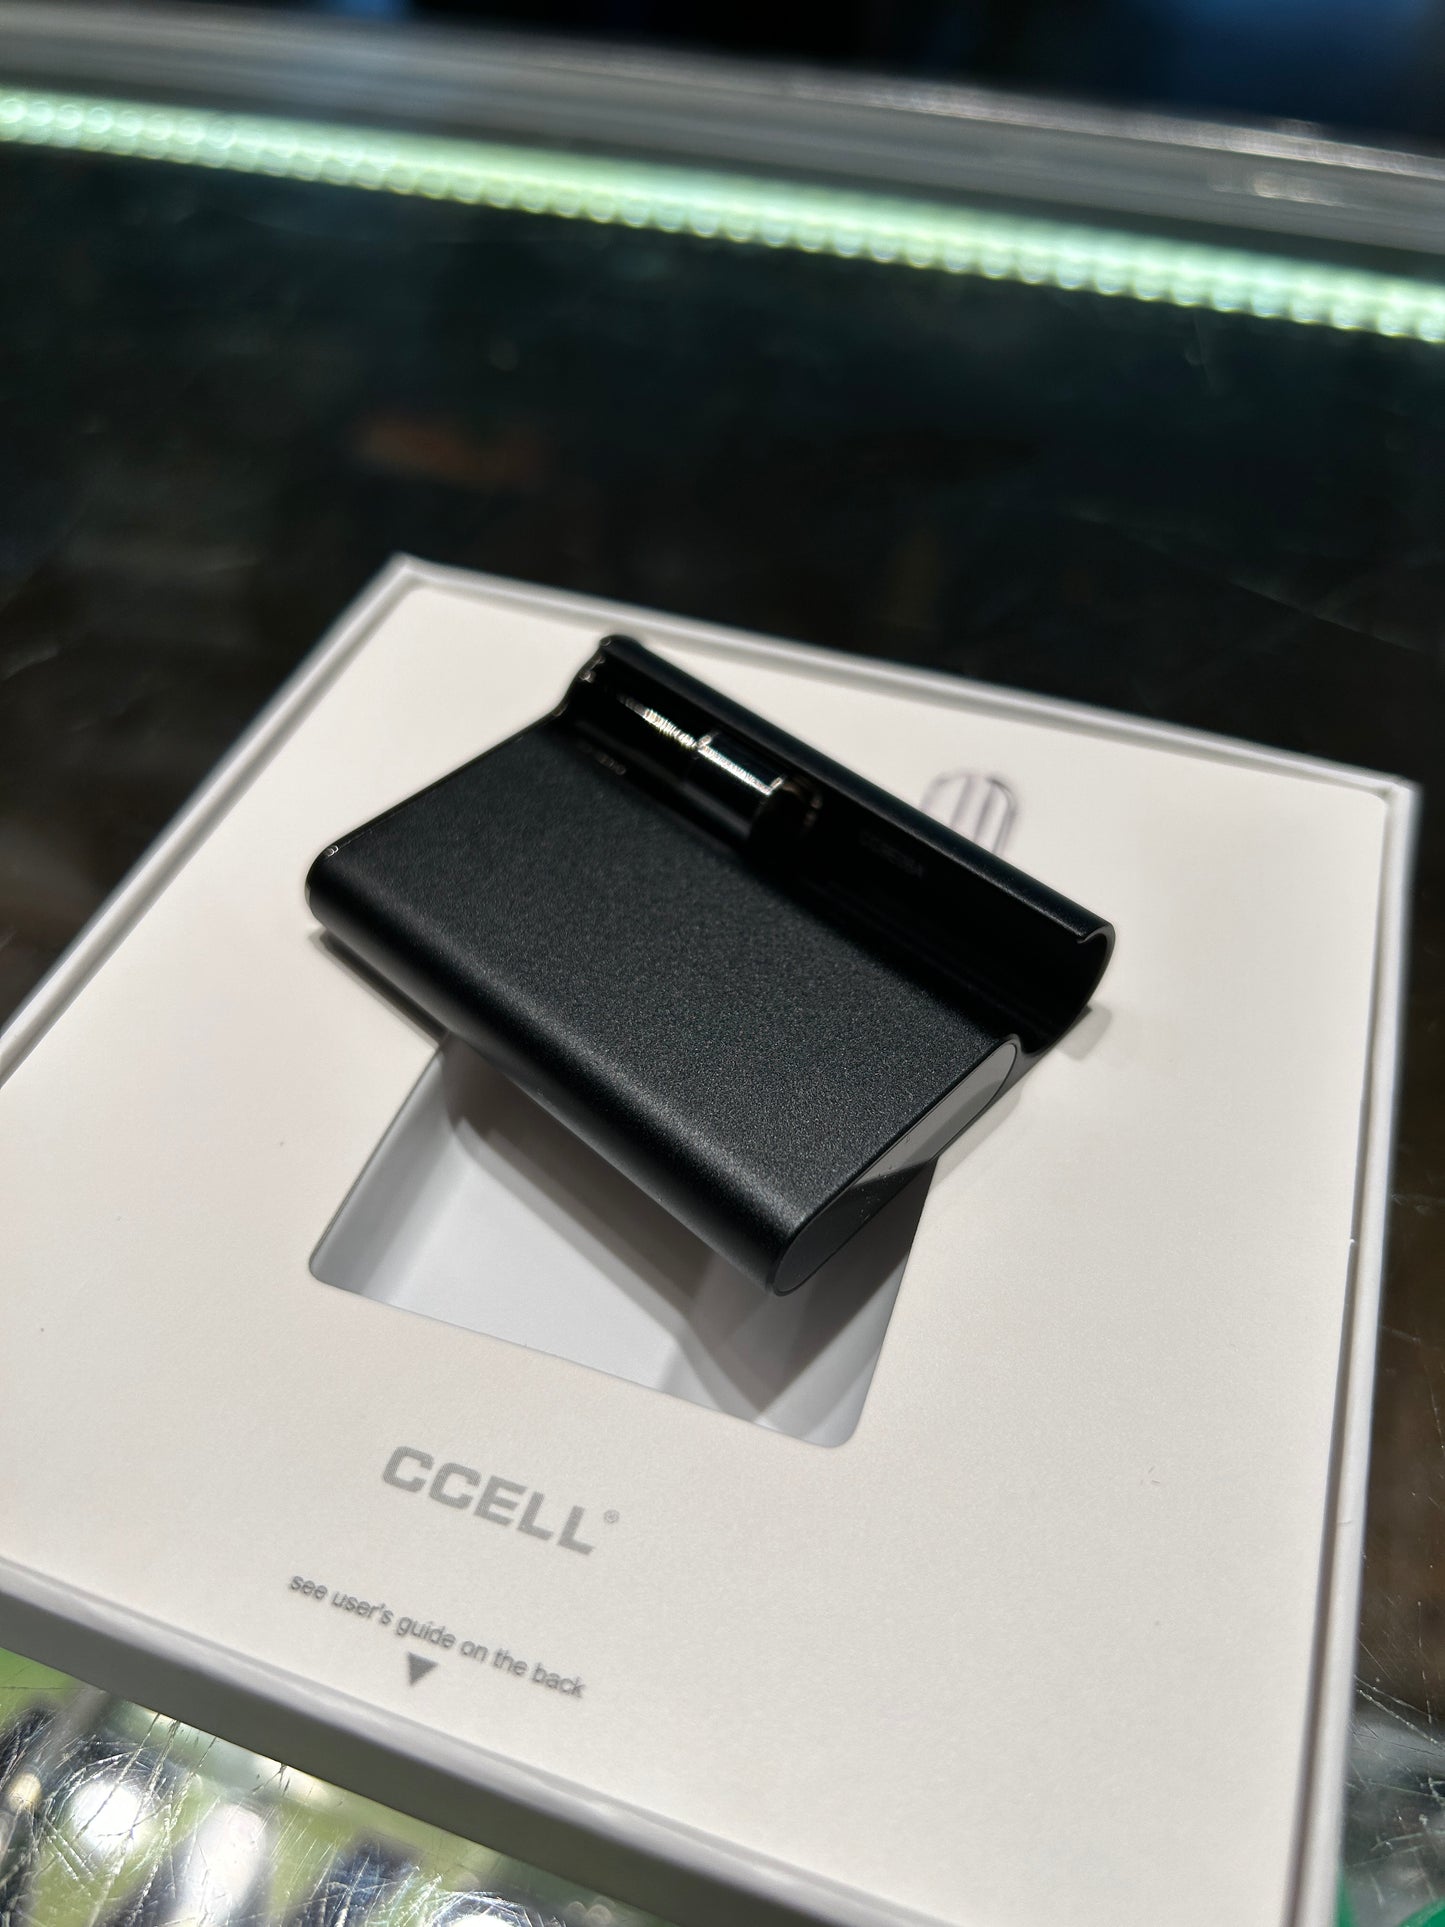 CCELL PALM 510 Cart Battery